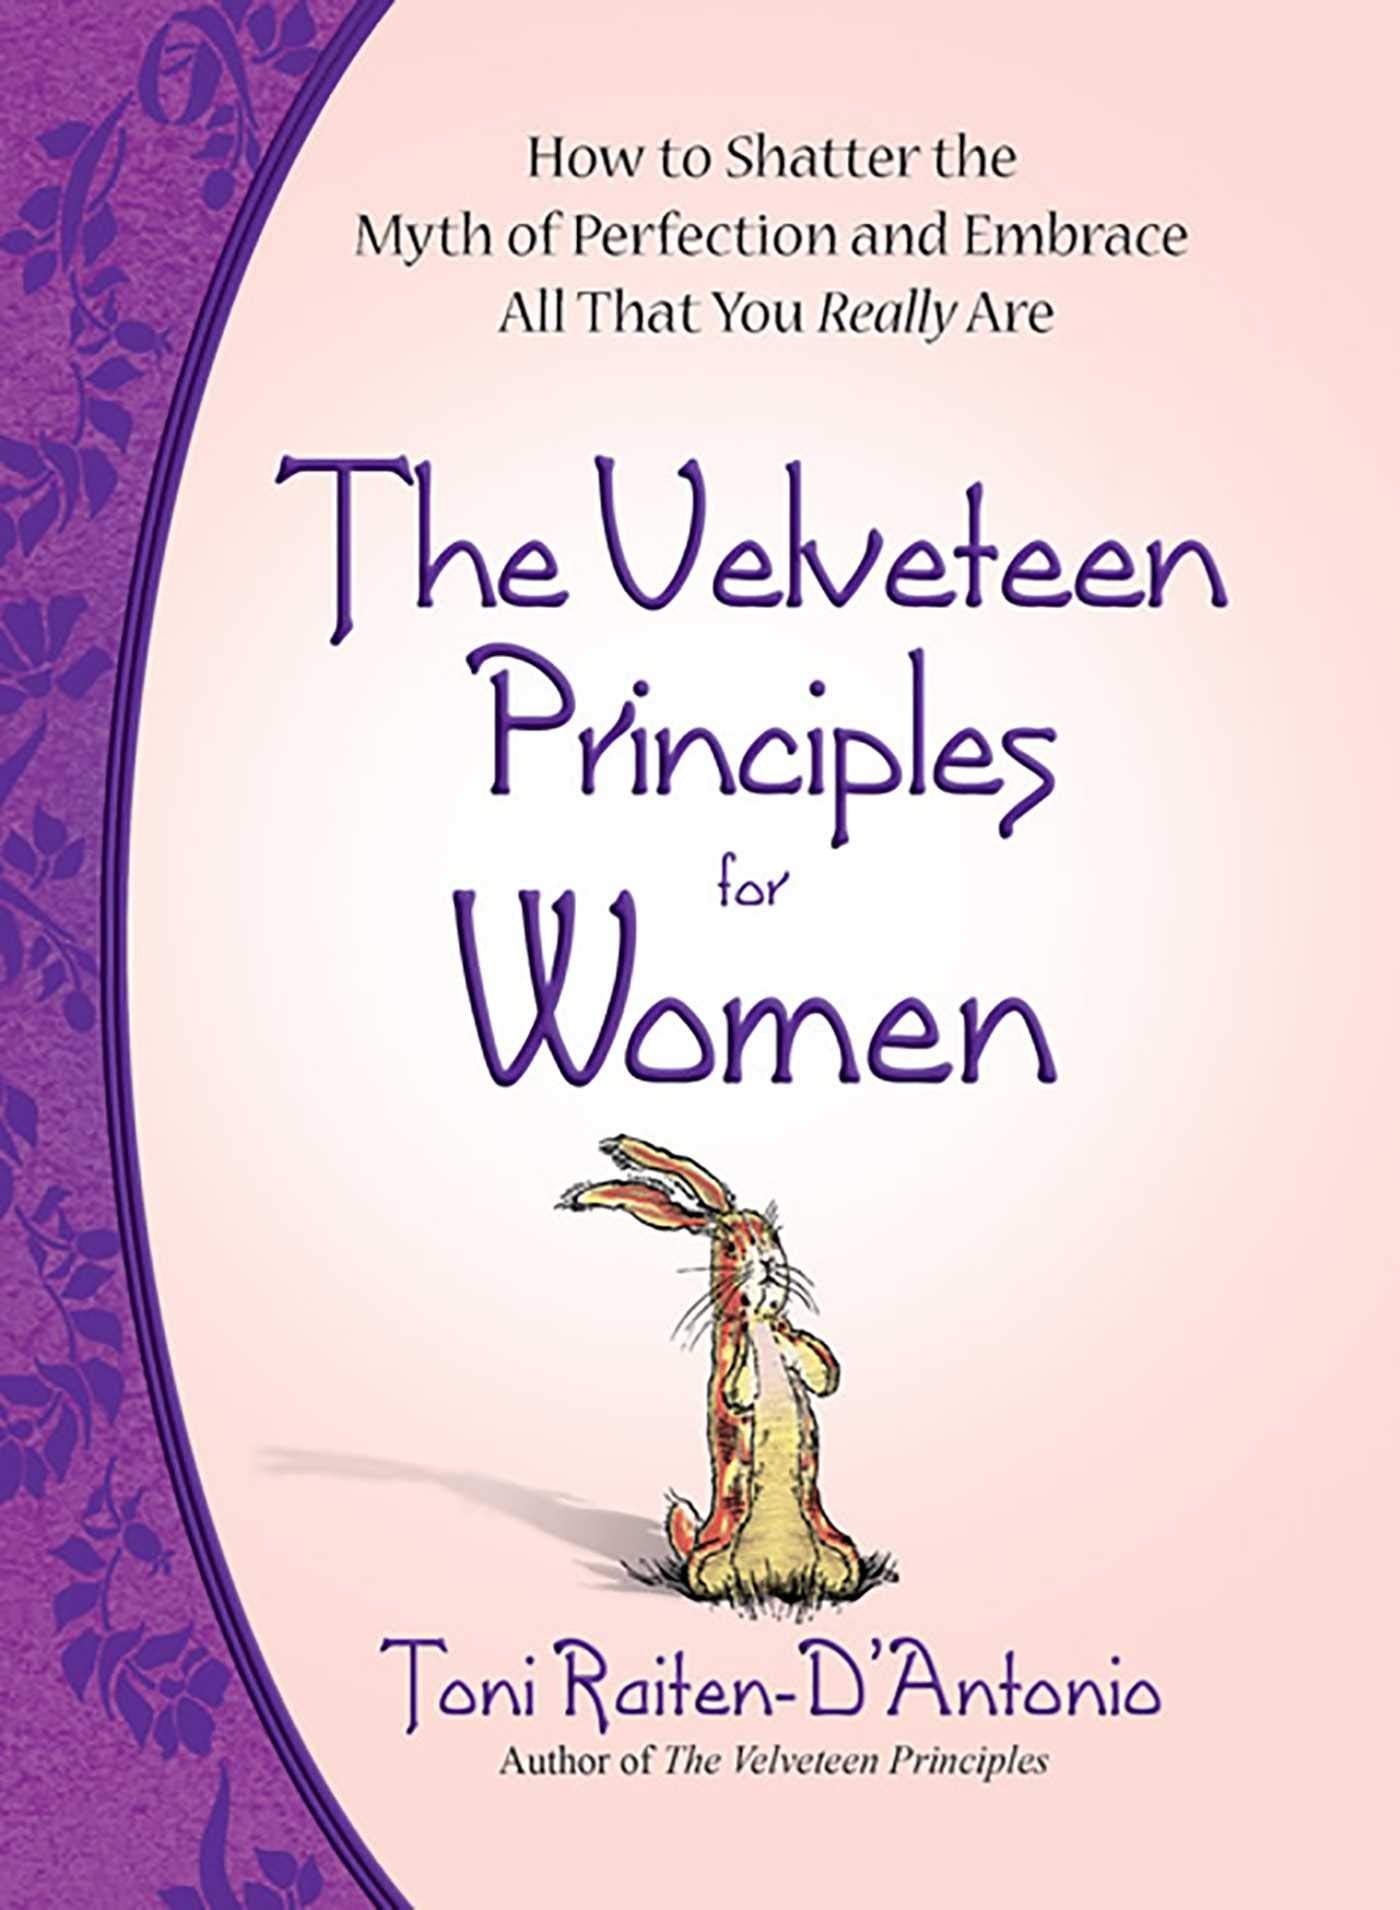 Velveteen Principles for Women, The: How to Shatter the Myth of Perfection and Embrace All That You Really Are